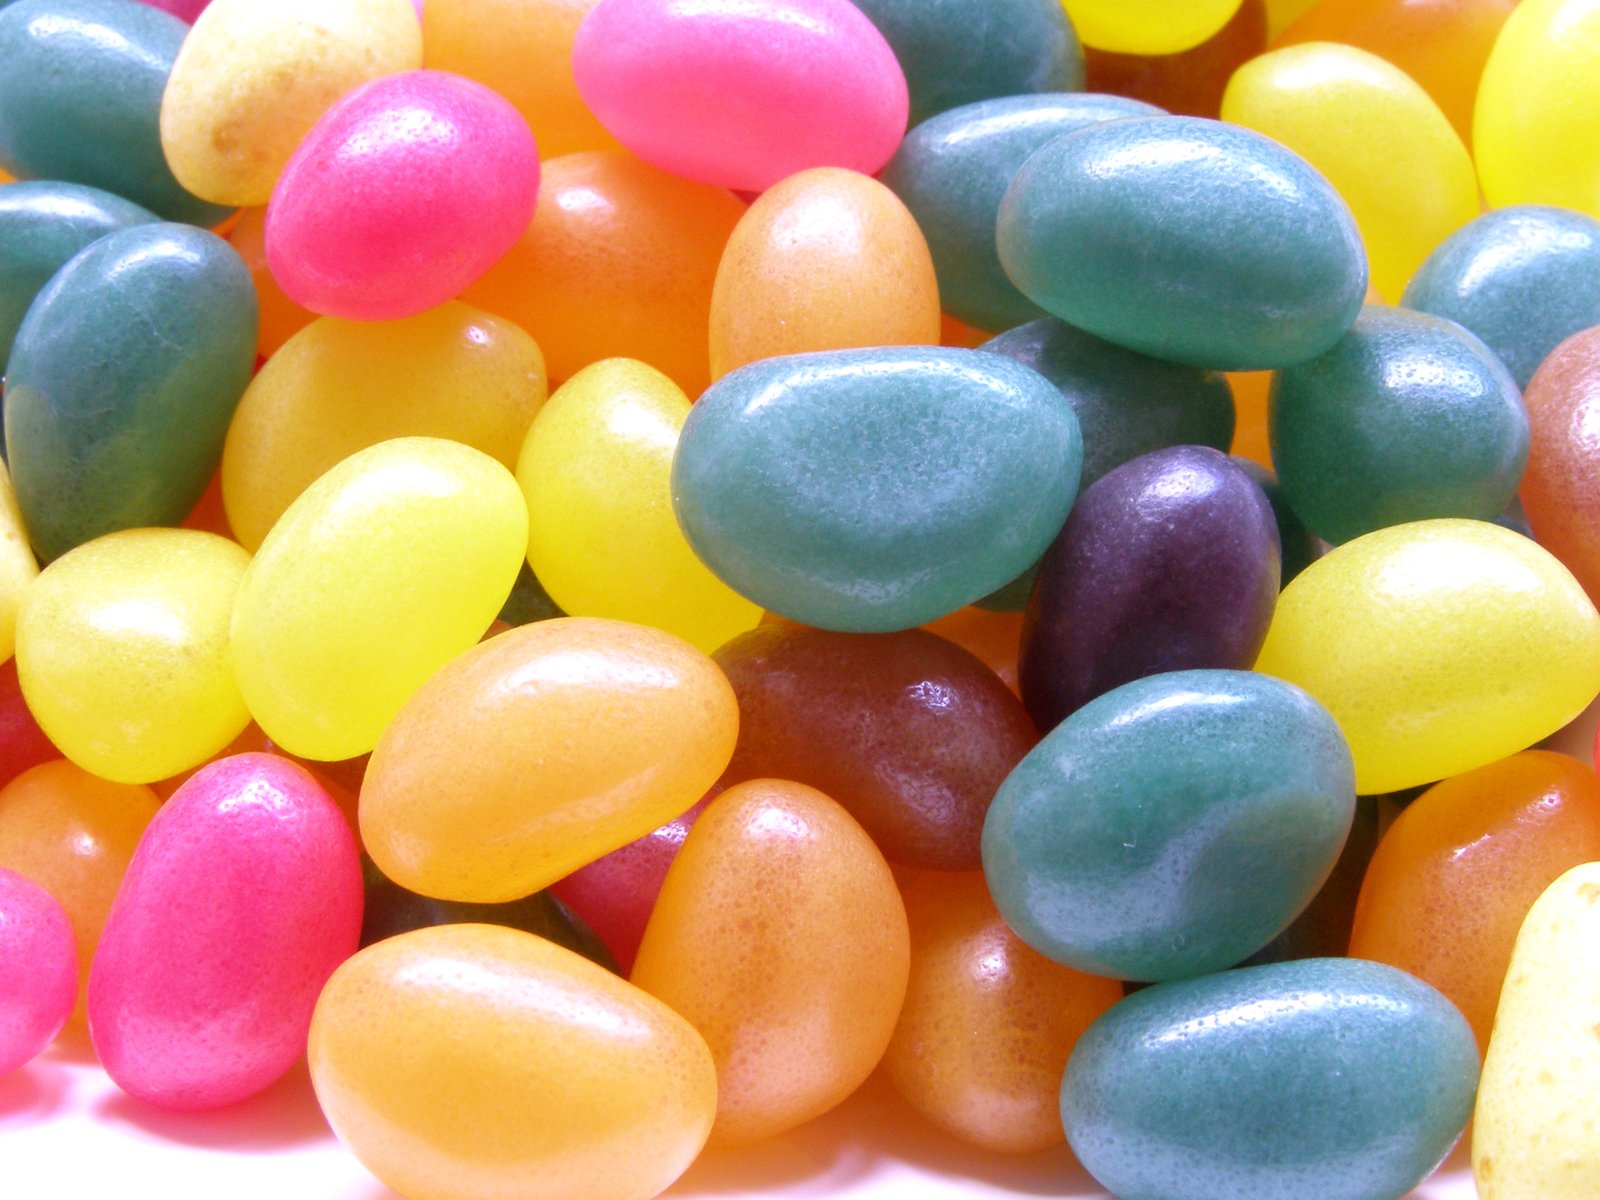 jelly beans are so bright in the po